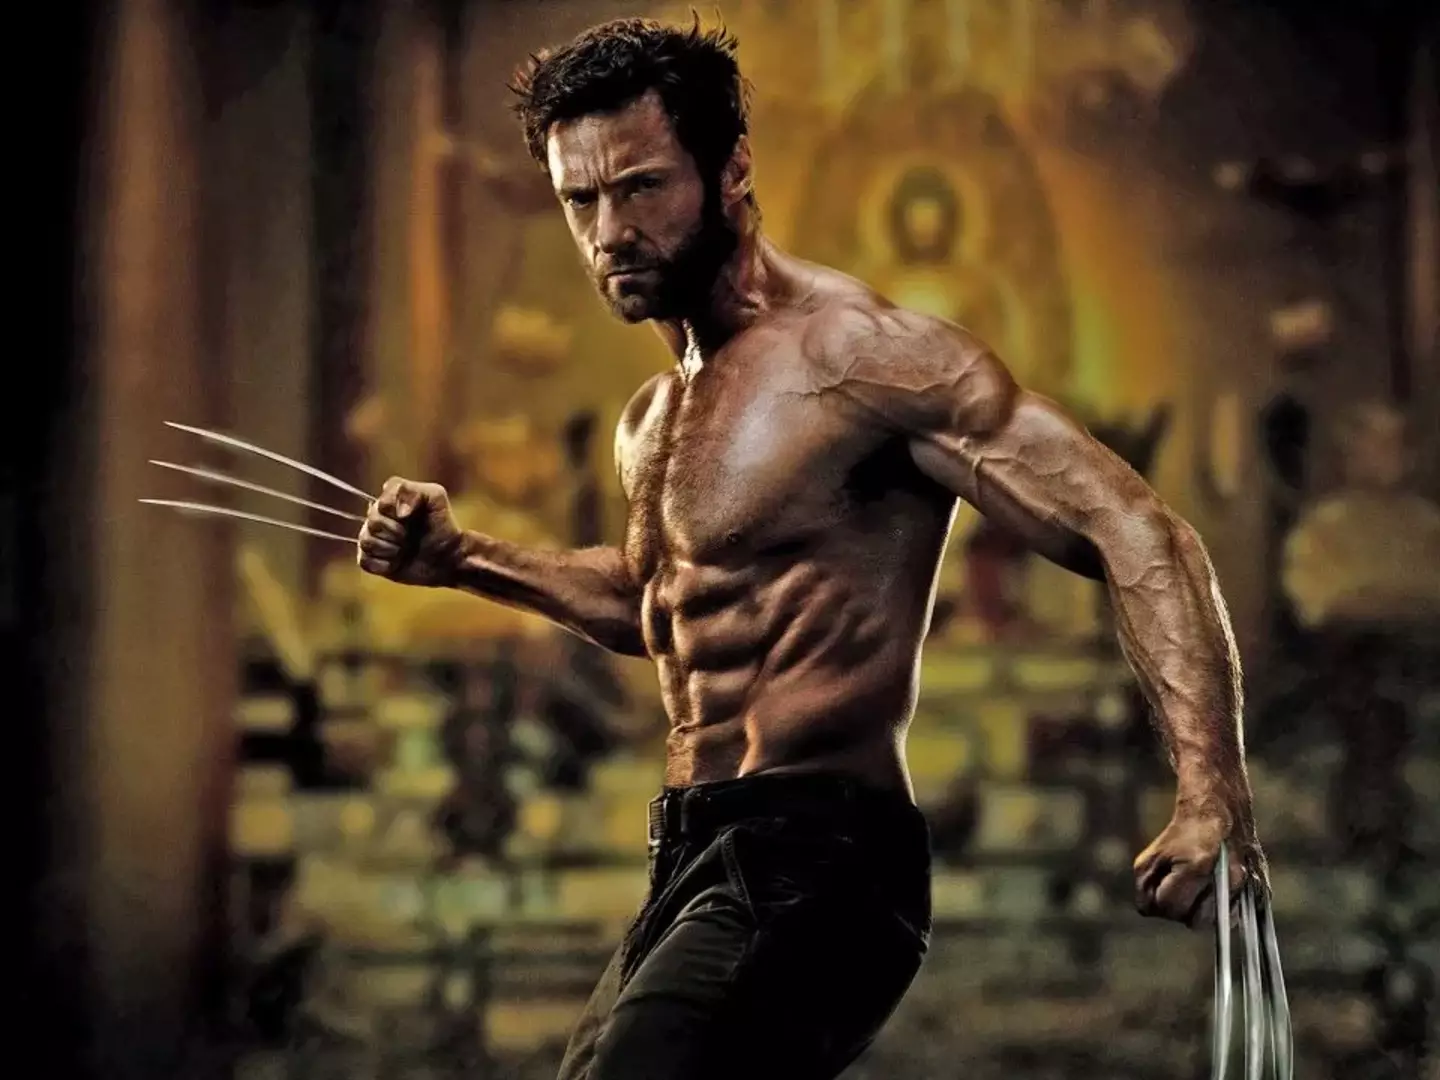 Wolverine is a tough role to play, and requires Jackman to be in great shape.